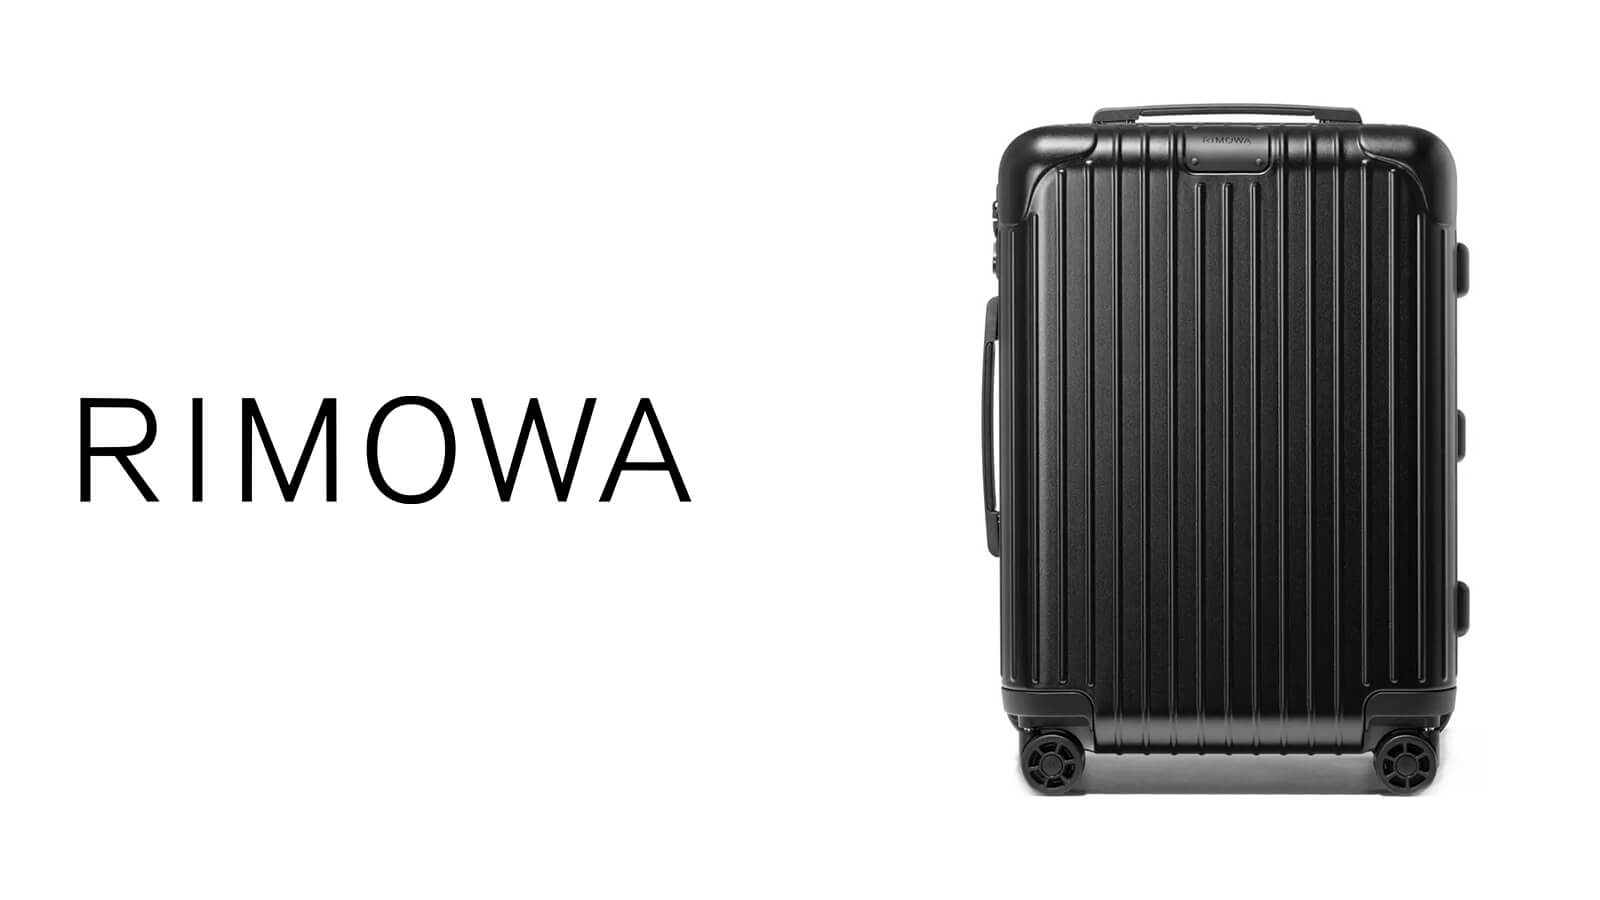 Luggage is The New Status Symbol: Are You An Away Or A Rimowa Woman?